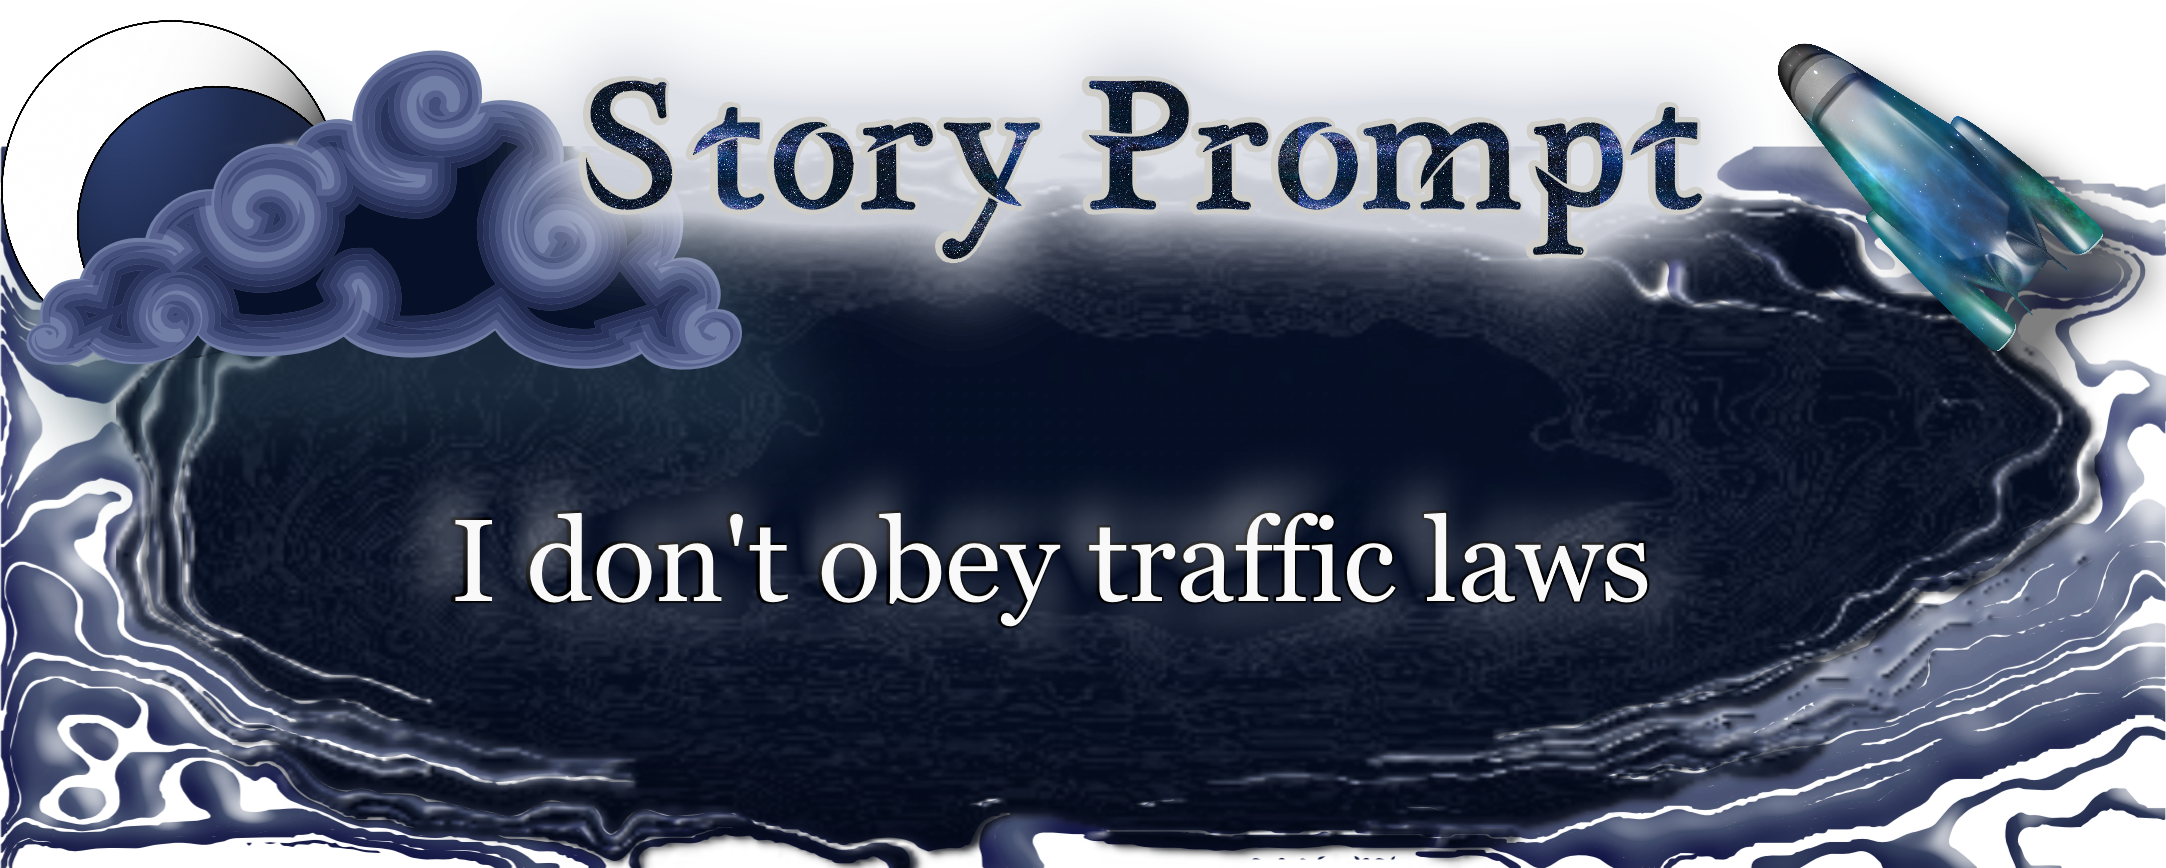 Author Jenna Eatough's Flash Fiction Story from writing prompt: I don't obey traffic laws